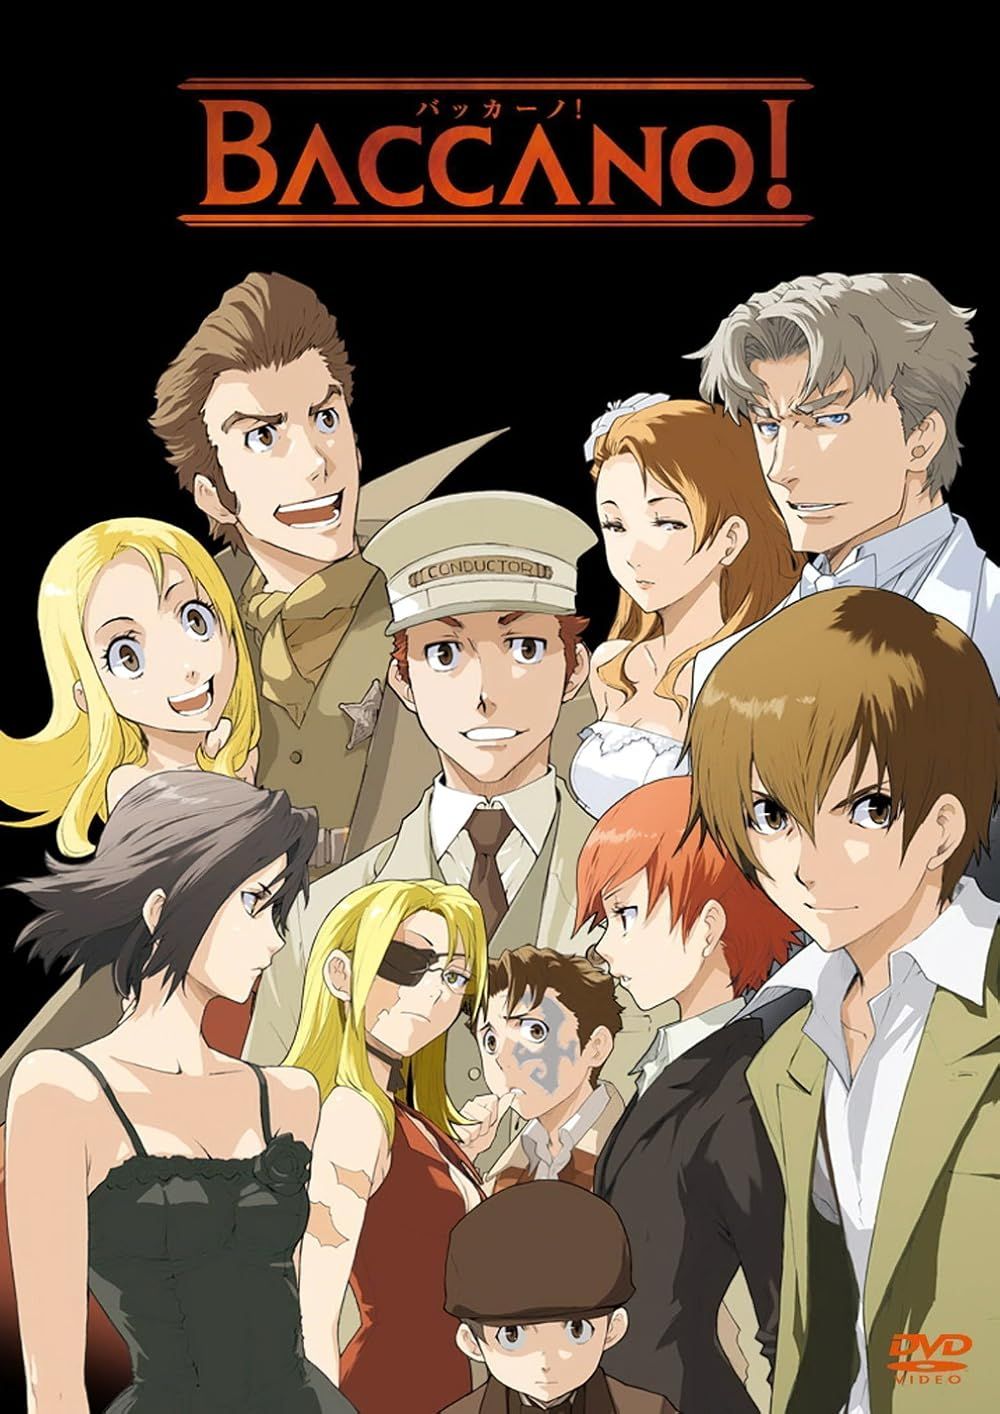 The Cast Stand Together on the Baccano! Poster